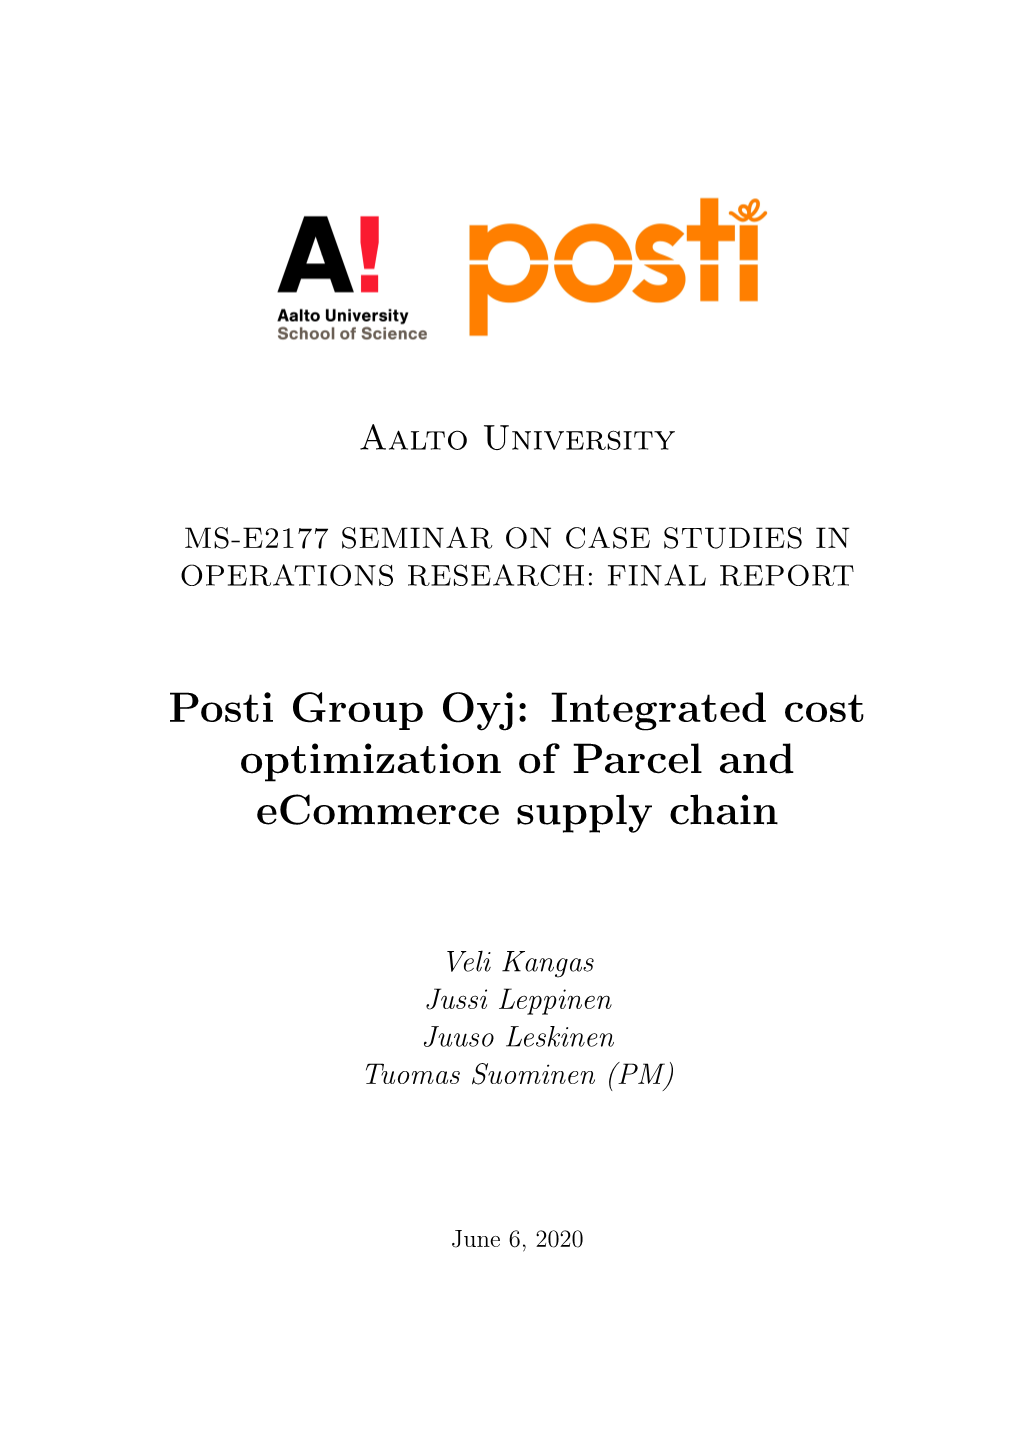 Posti Group Oyj: Integrated Cost Optimization of Parcel and Ecommerce Supply Chain